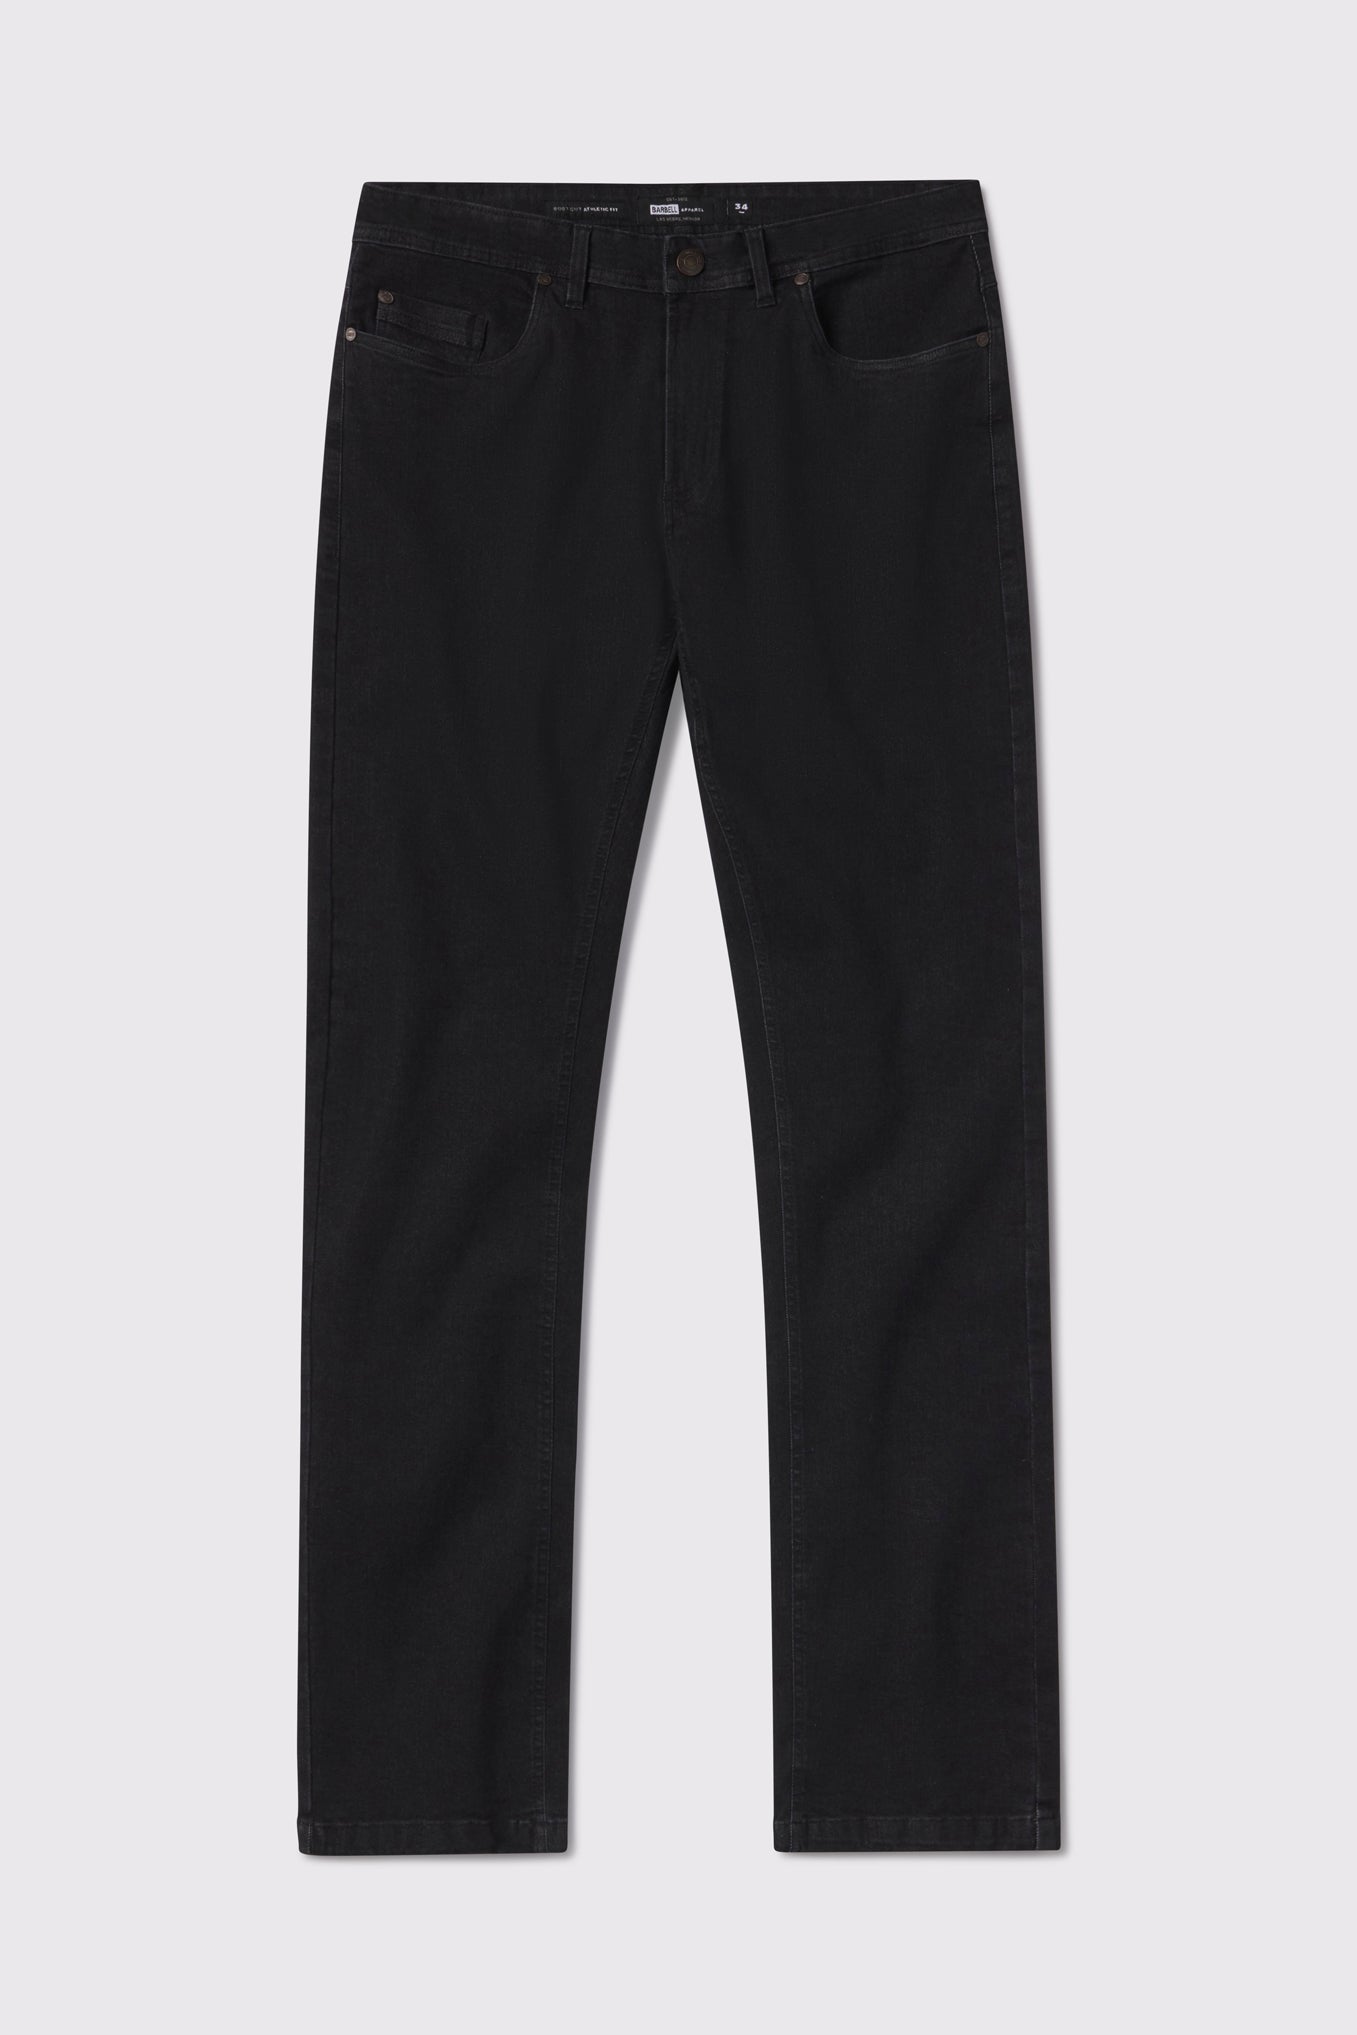 Mens Boot Cut Athletic Fit Jeans 2.0 -Black - photo from front flat lay #color_black